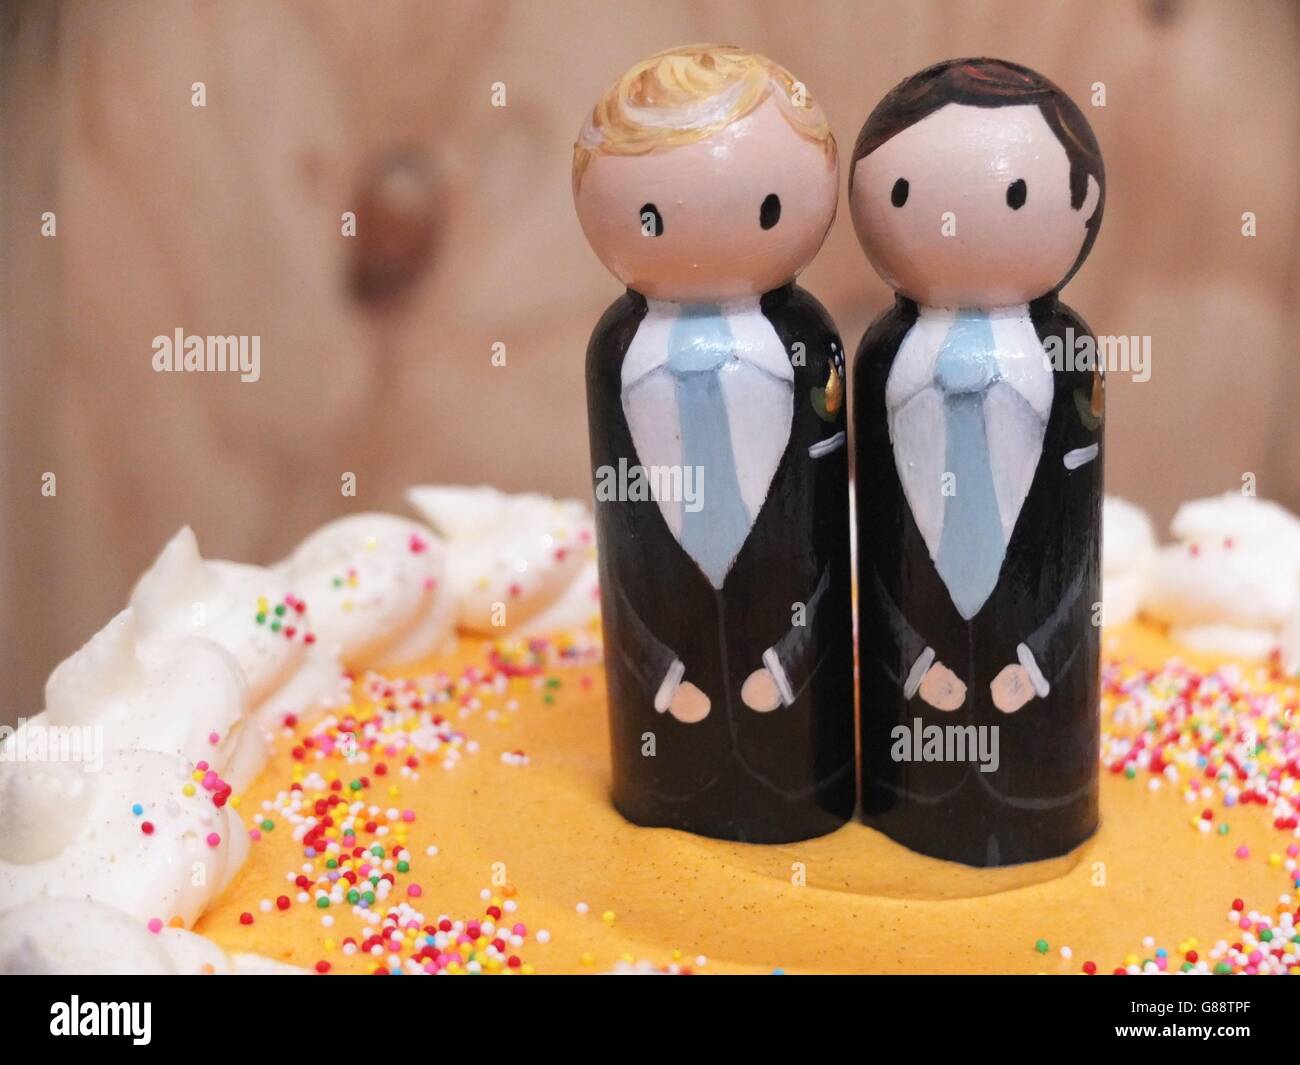 Marriage equality wedding cake toppers Stock Photo